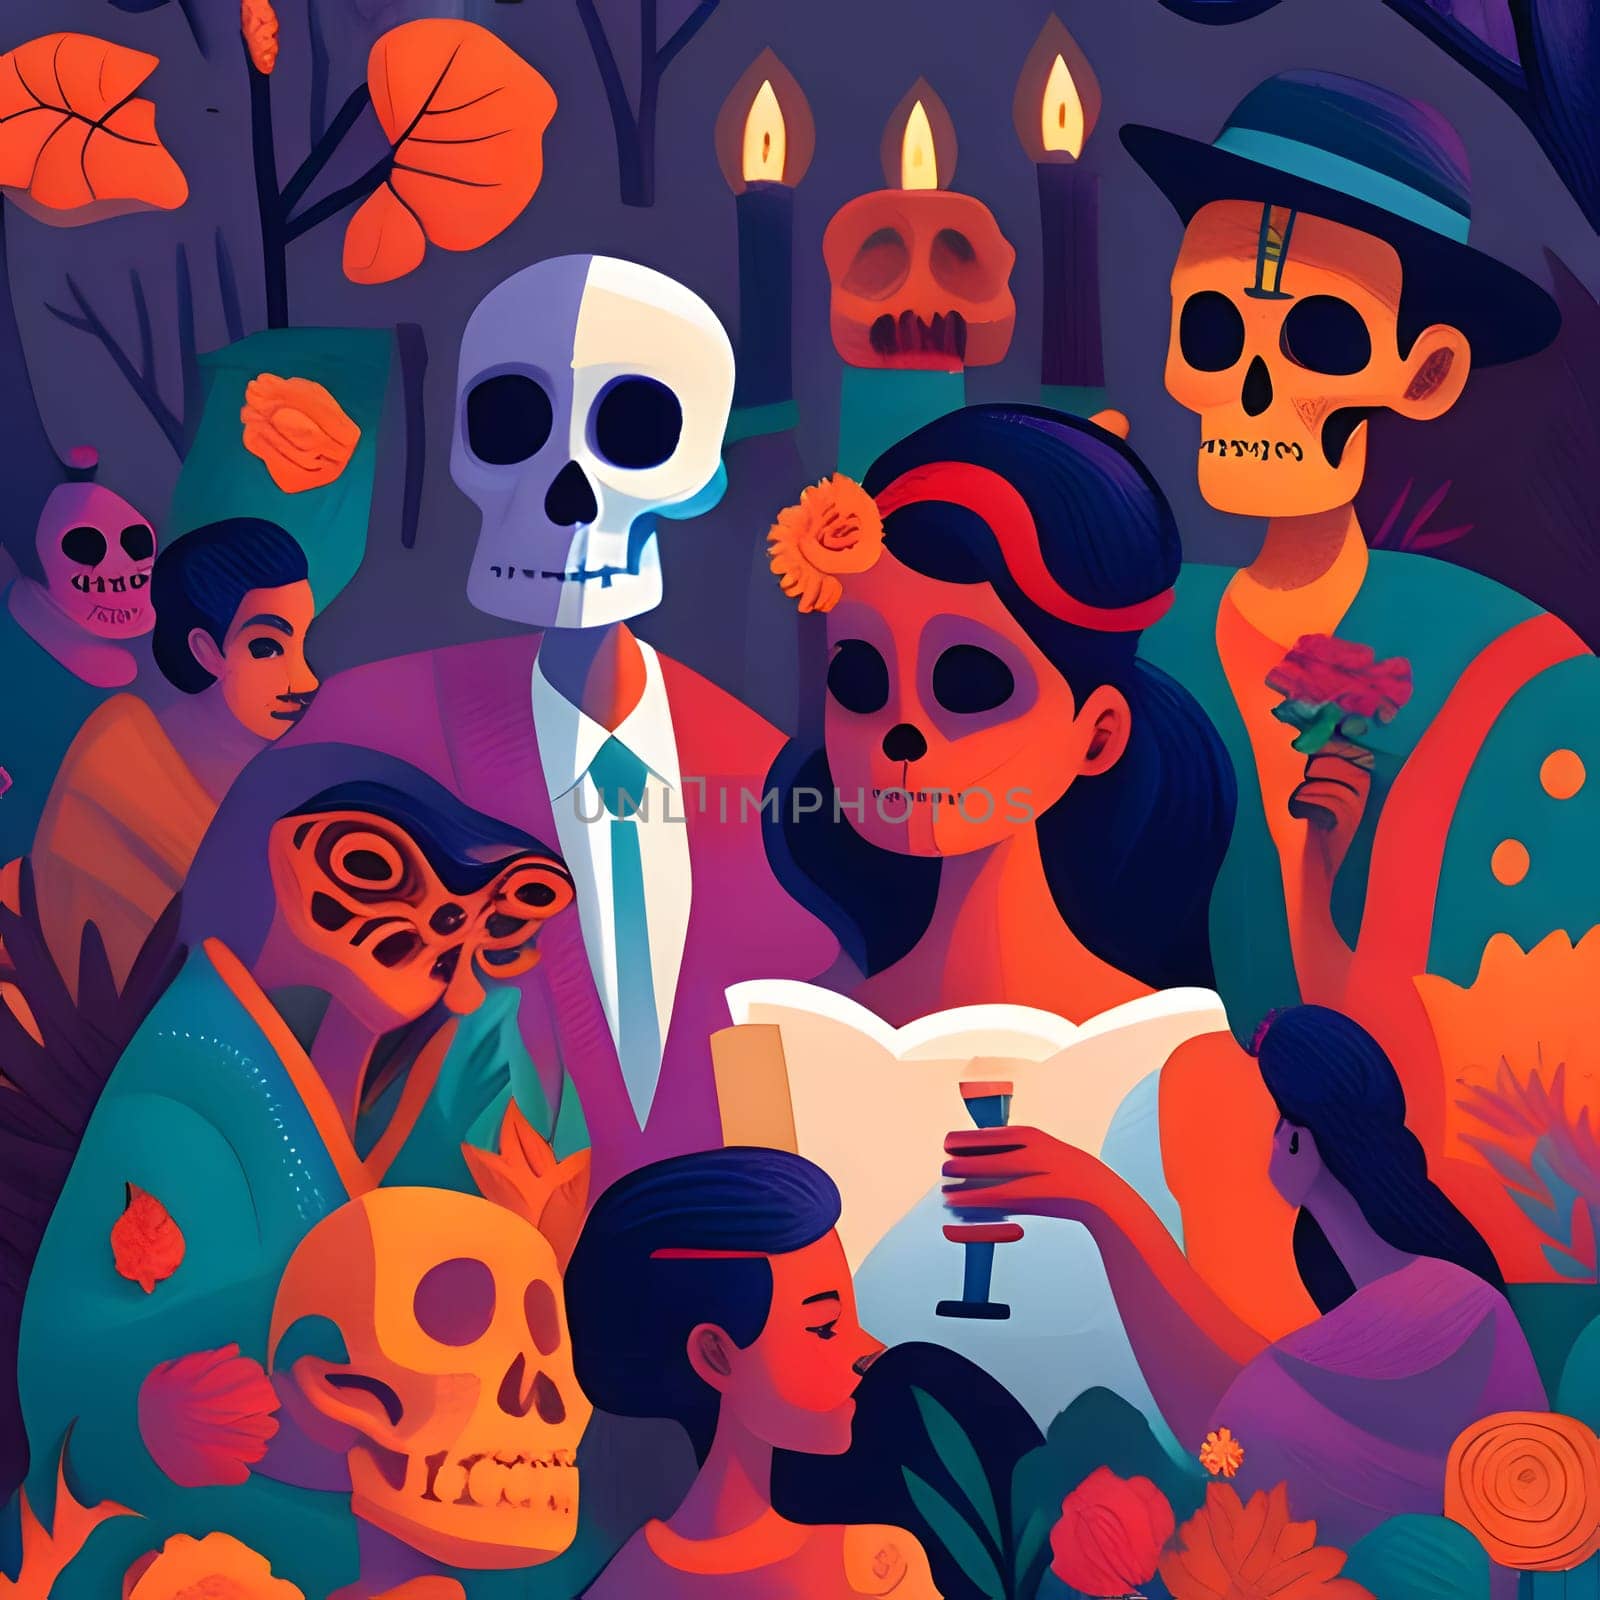 Painted abstract images of people and living skeletons of corpses on a colorful composition. For the day of the dead and Halloween. Atmosphere of death and solemnity.